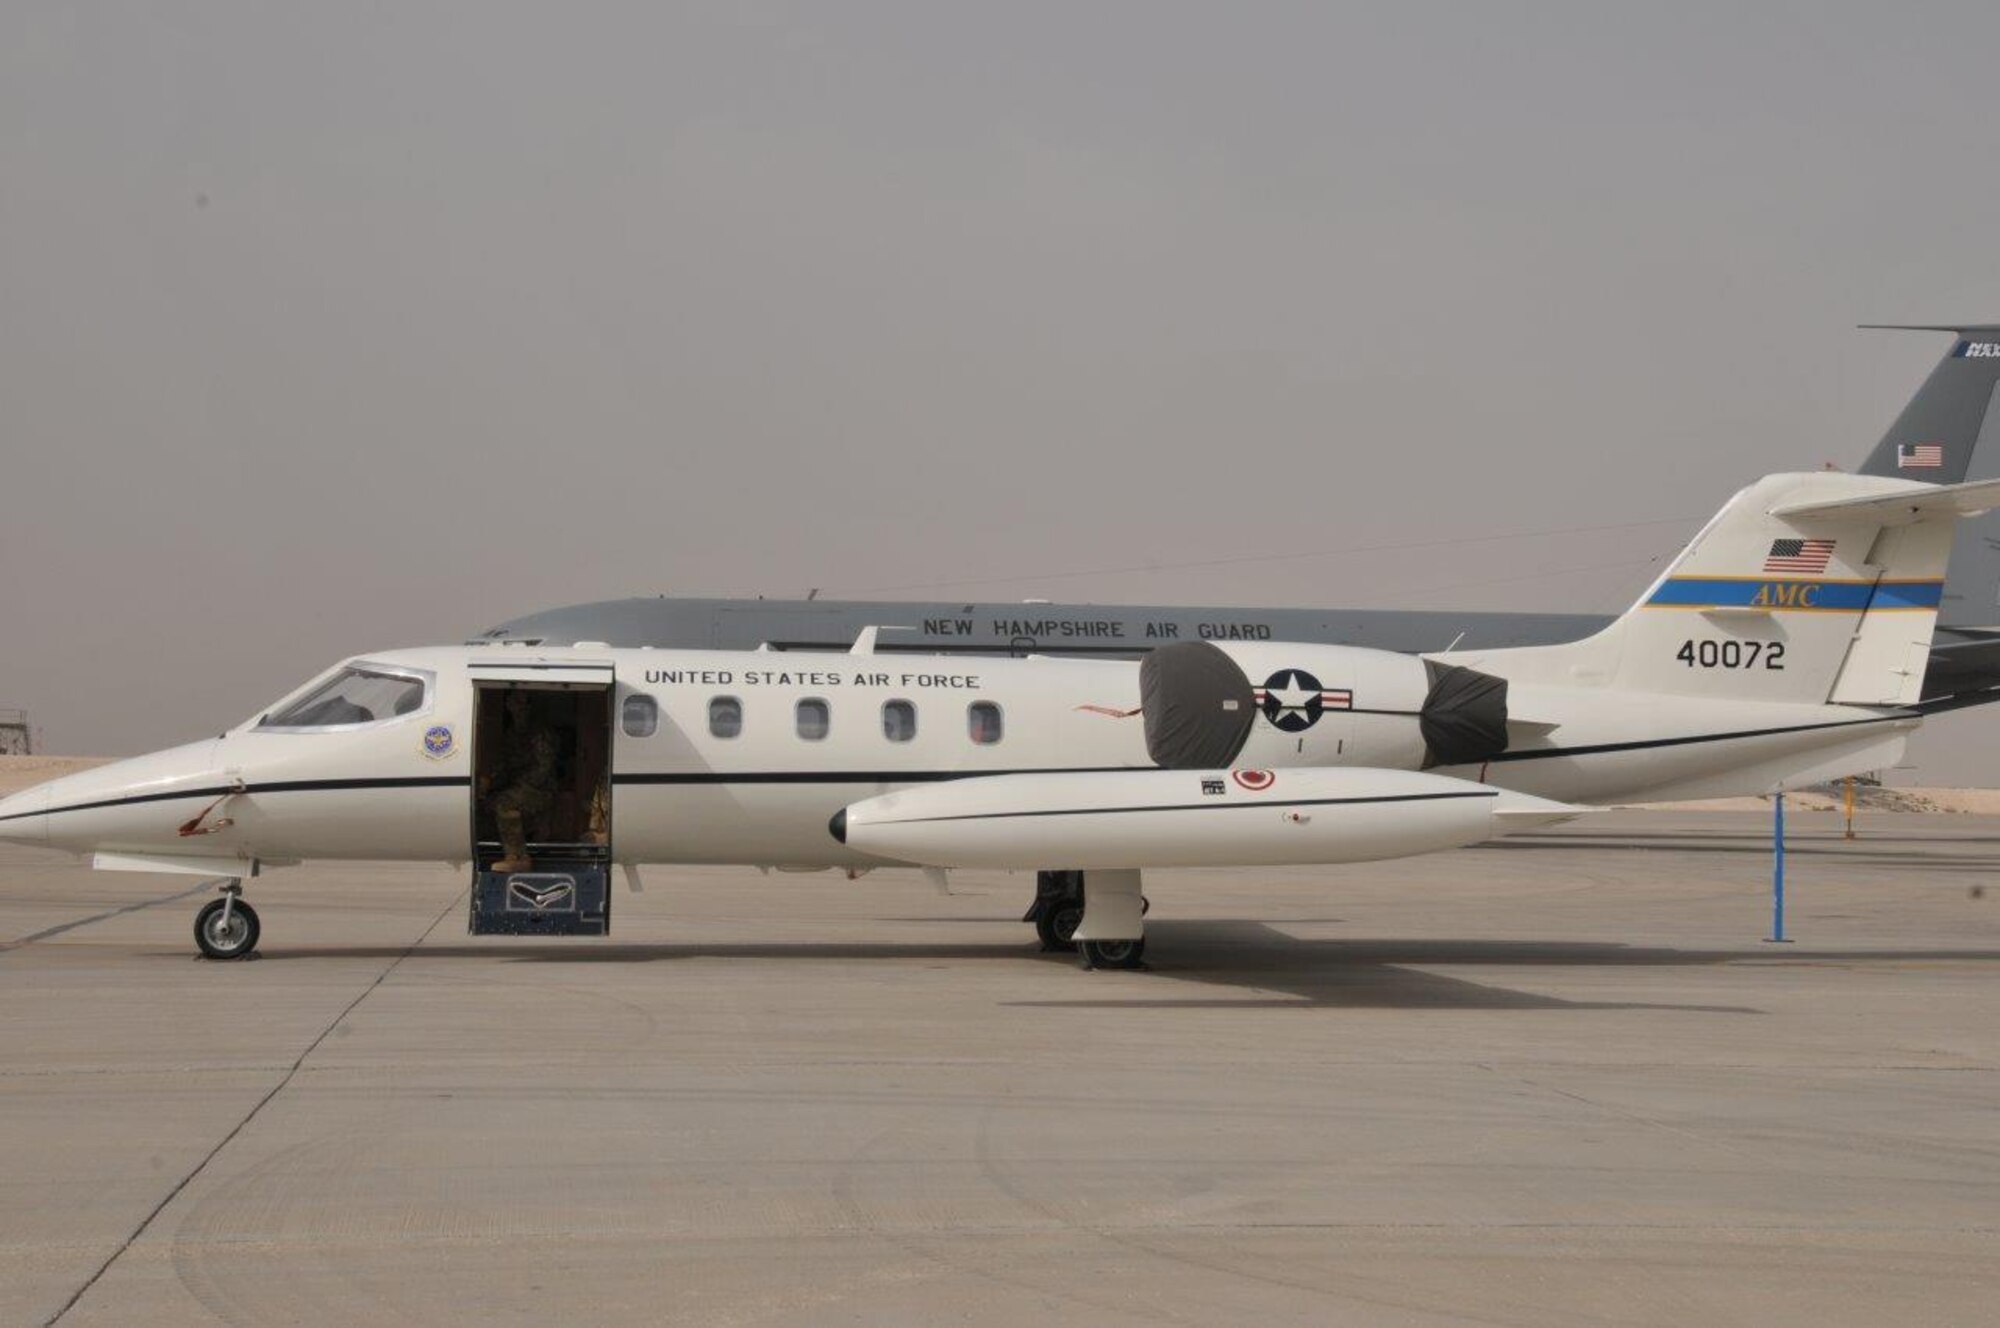 A C-21 Learjet waits for visitors at the annual Flight Line Fest Jan. 10 at Al Udeid Air Base, Qatar. Flight Line Fest is a joint partnership between the 379th Air Expeditionary Wing and Qatar Emiri Air Force held to foster relations between Qatar and the United States. (U.S. Air Force photo by Tech. Sgt. Terrica Y. Jones)